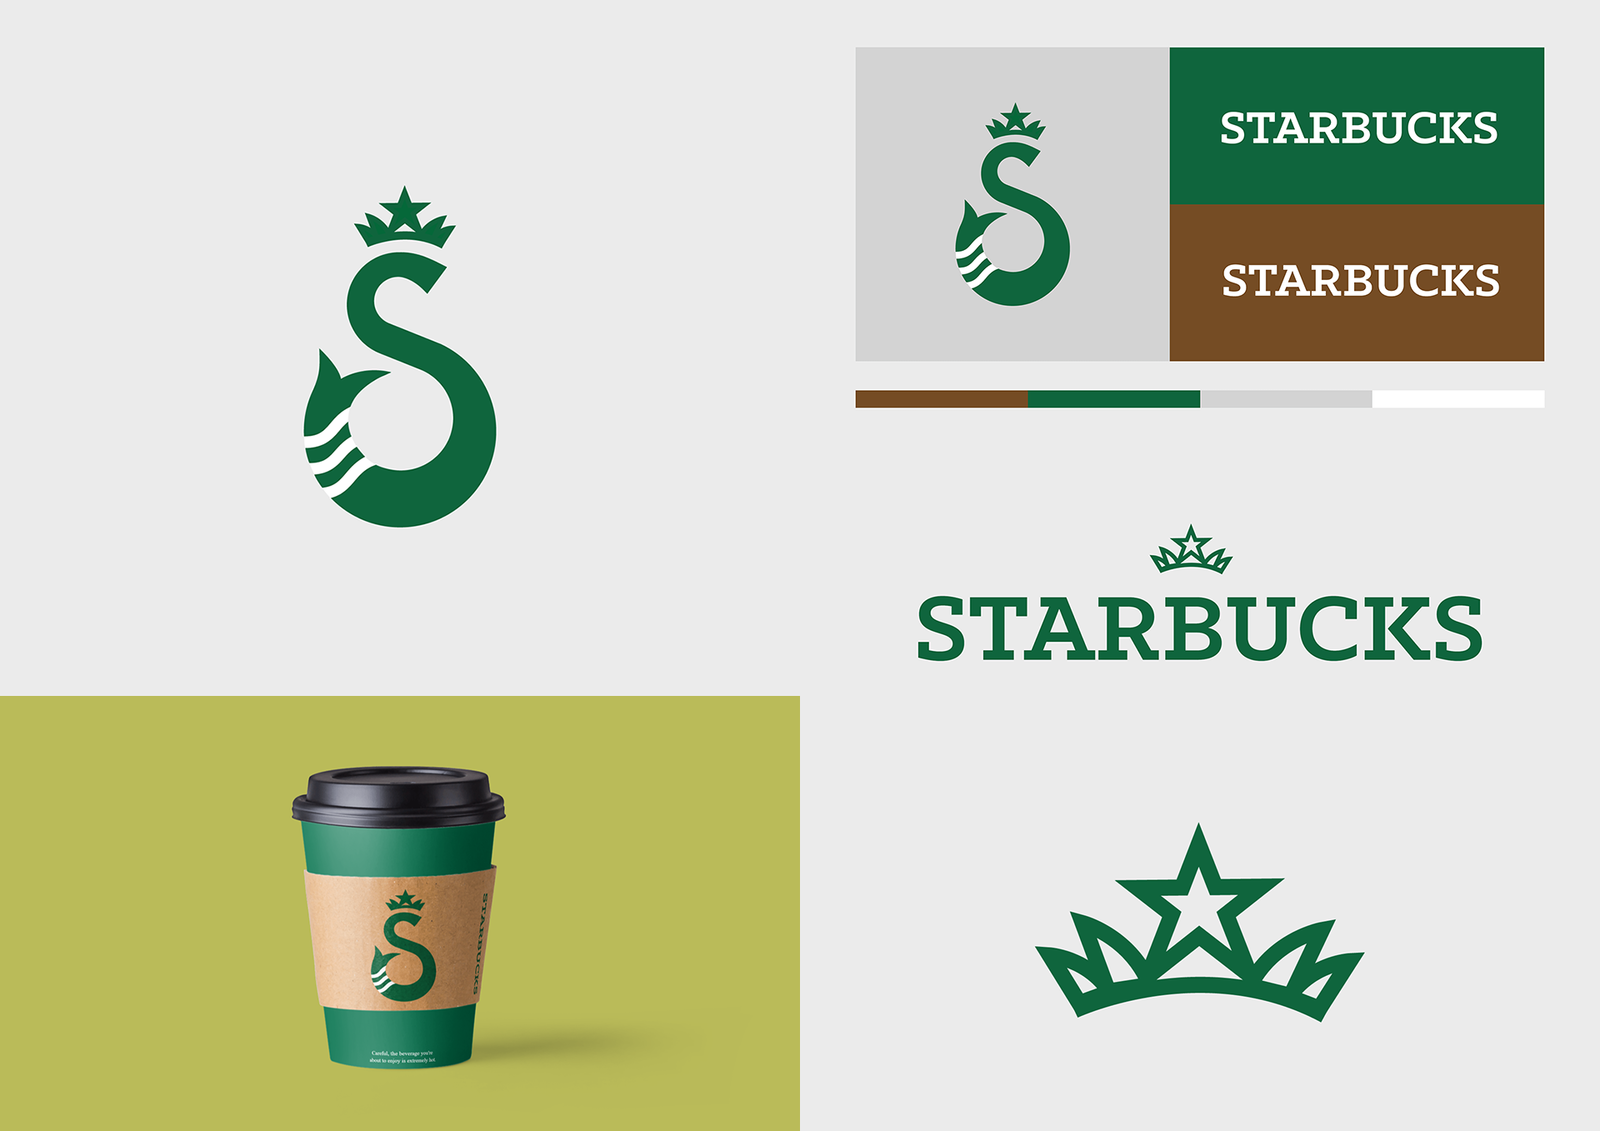 starbucks-logo-redesign-by-clarence-lalata-on-dribbble